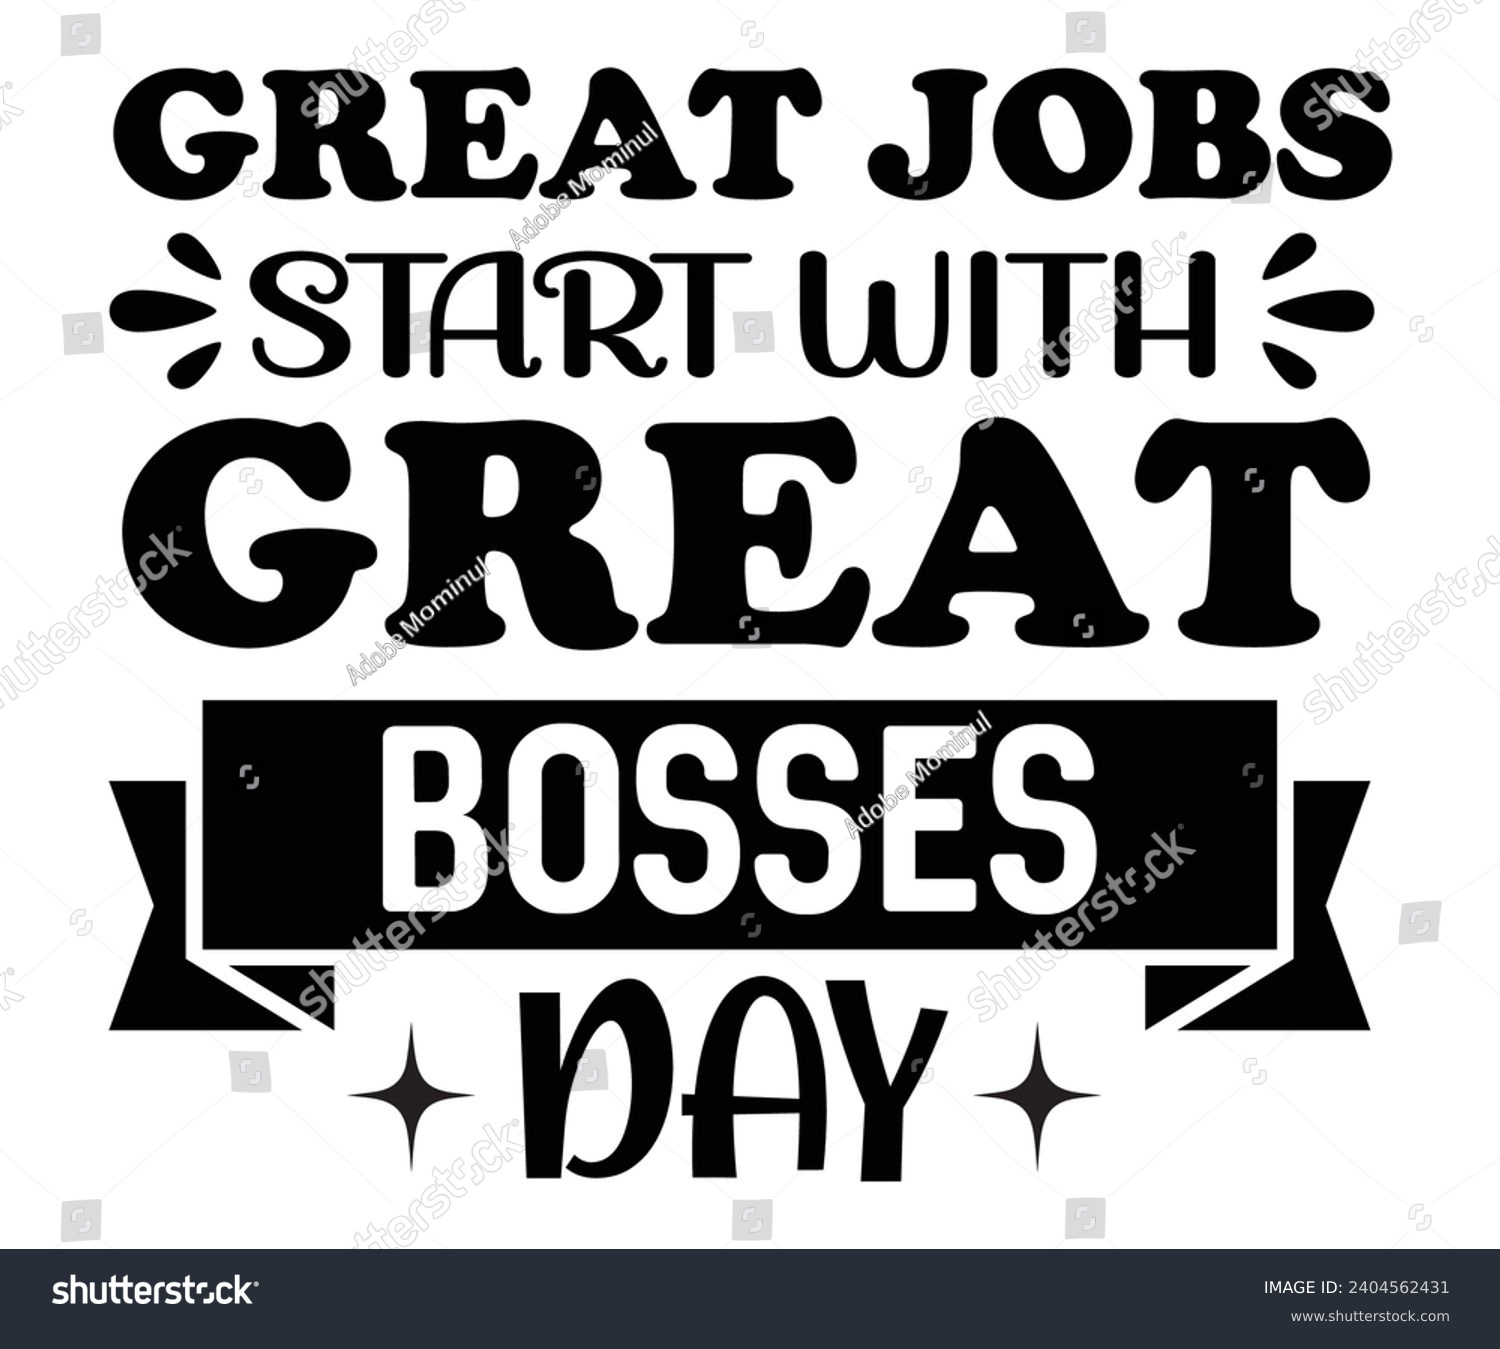 SVG of Great Jobs Start With Great Bosses Day Svg,Happy Boss Day svg,Boss Saying Quotes,Boss Day T-shirt,Gift for Boss,Great Jobs,Happy Bosses Day t-shirt,Girl Boss Shirt,Motivational Boss,Cut File,Circut, svg